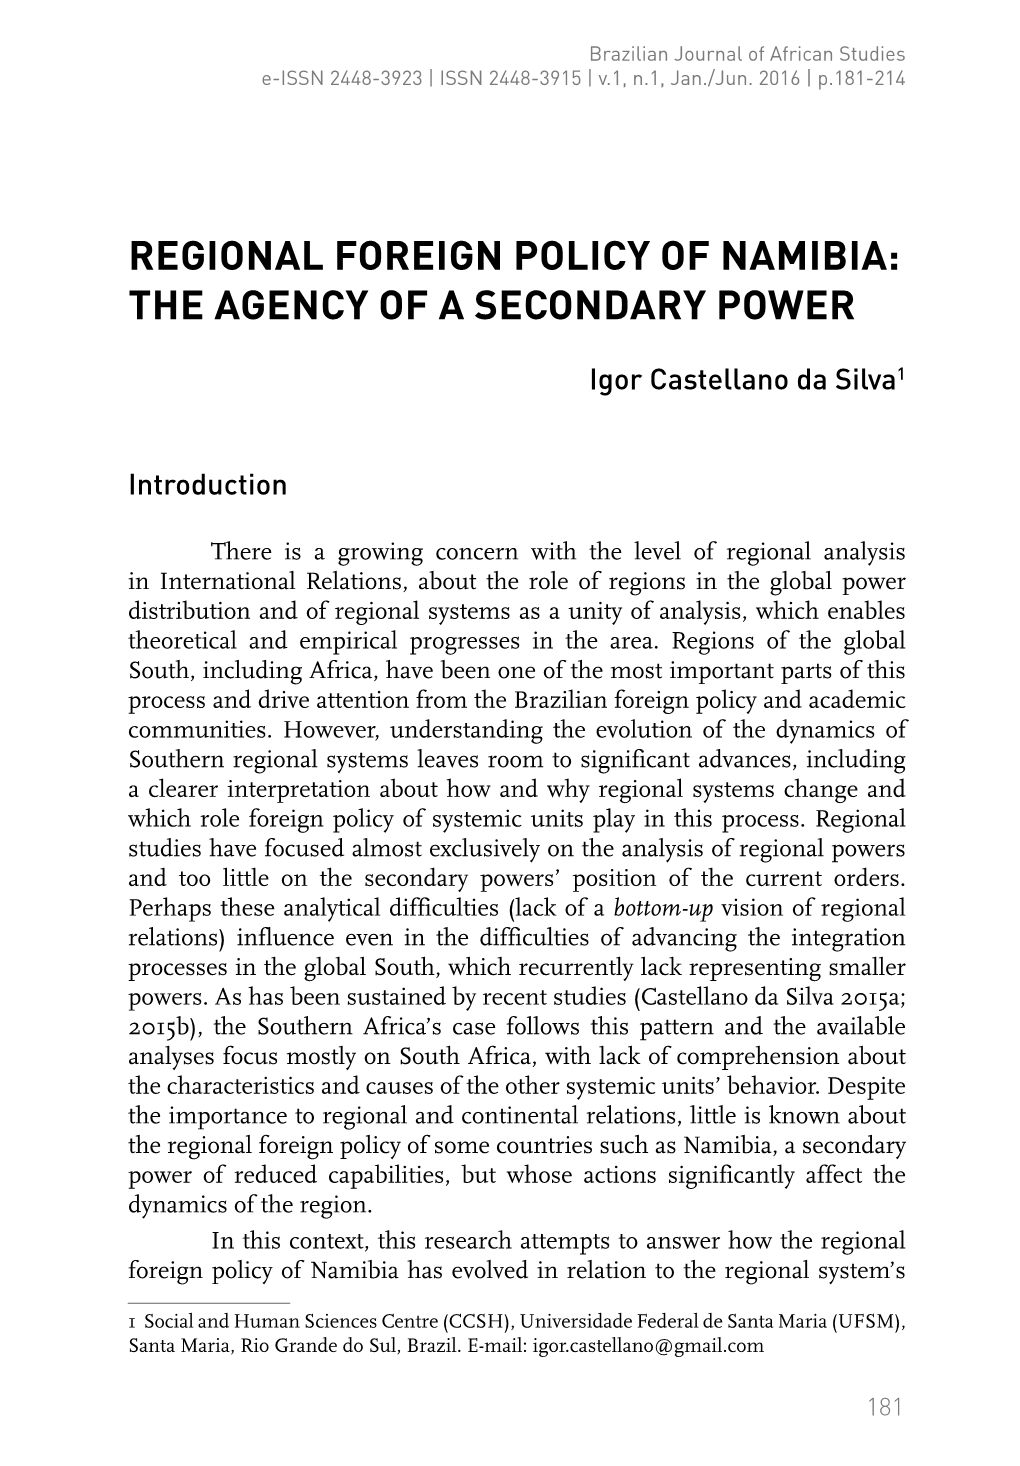 Regional Foreign Policy of Namibia: the Agency of a Secondary Power